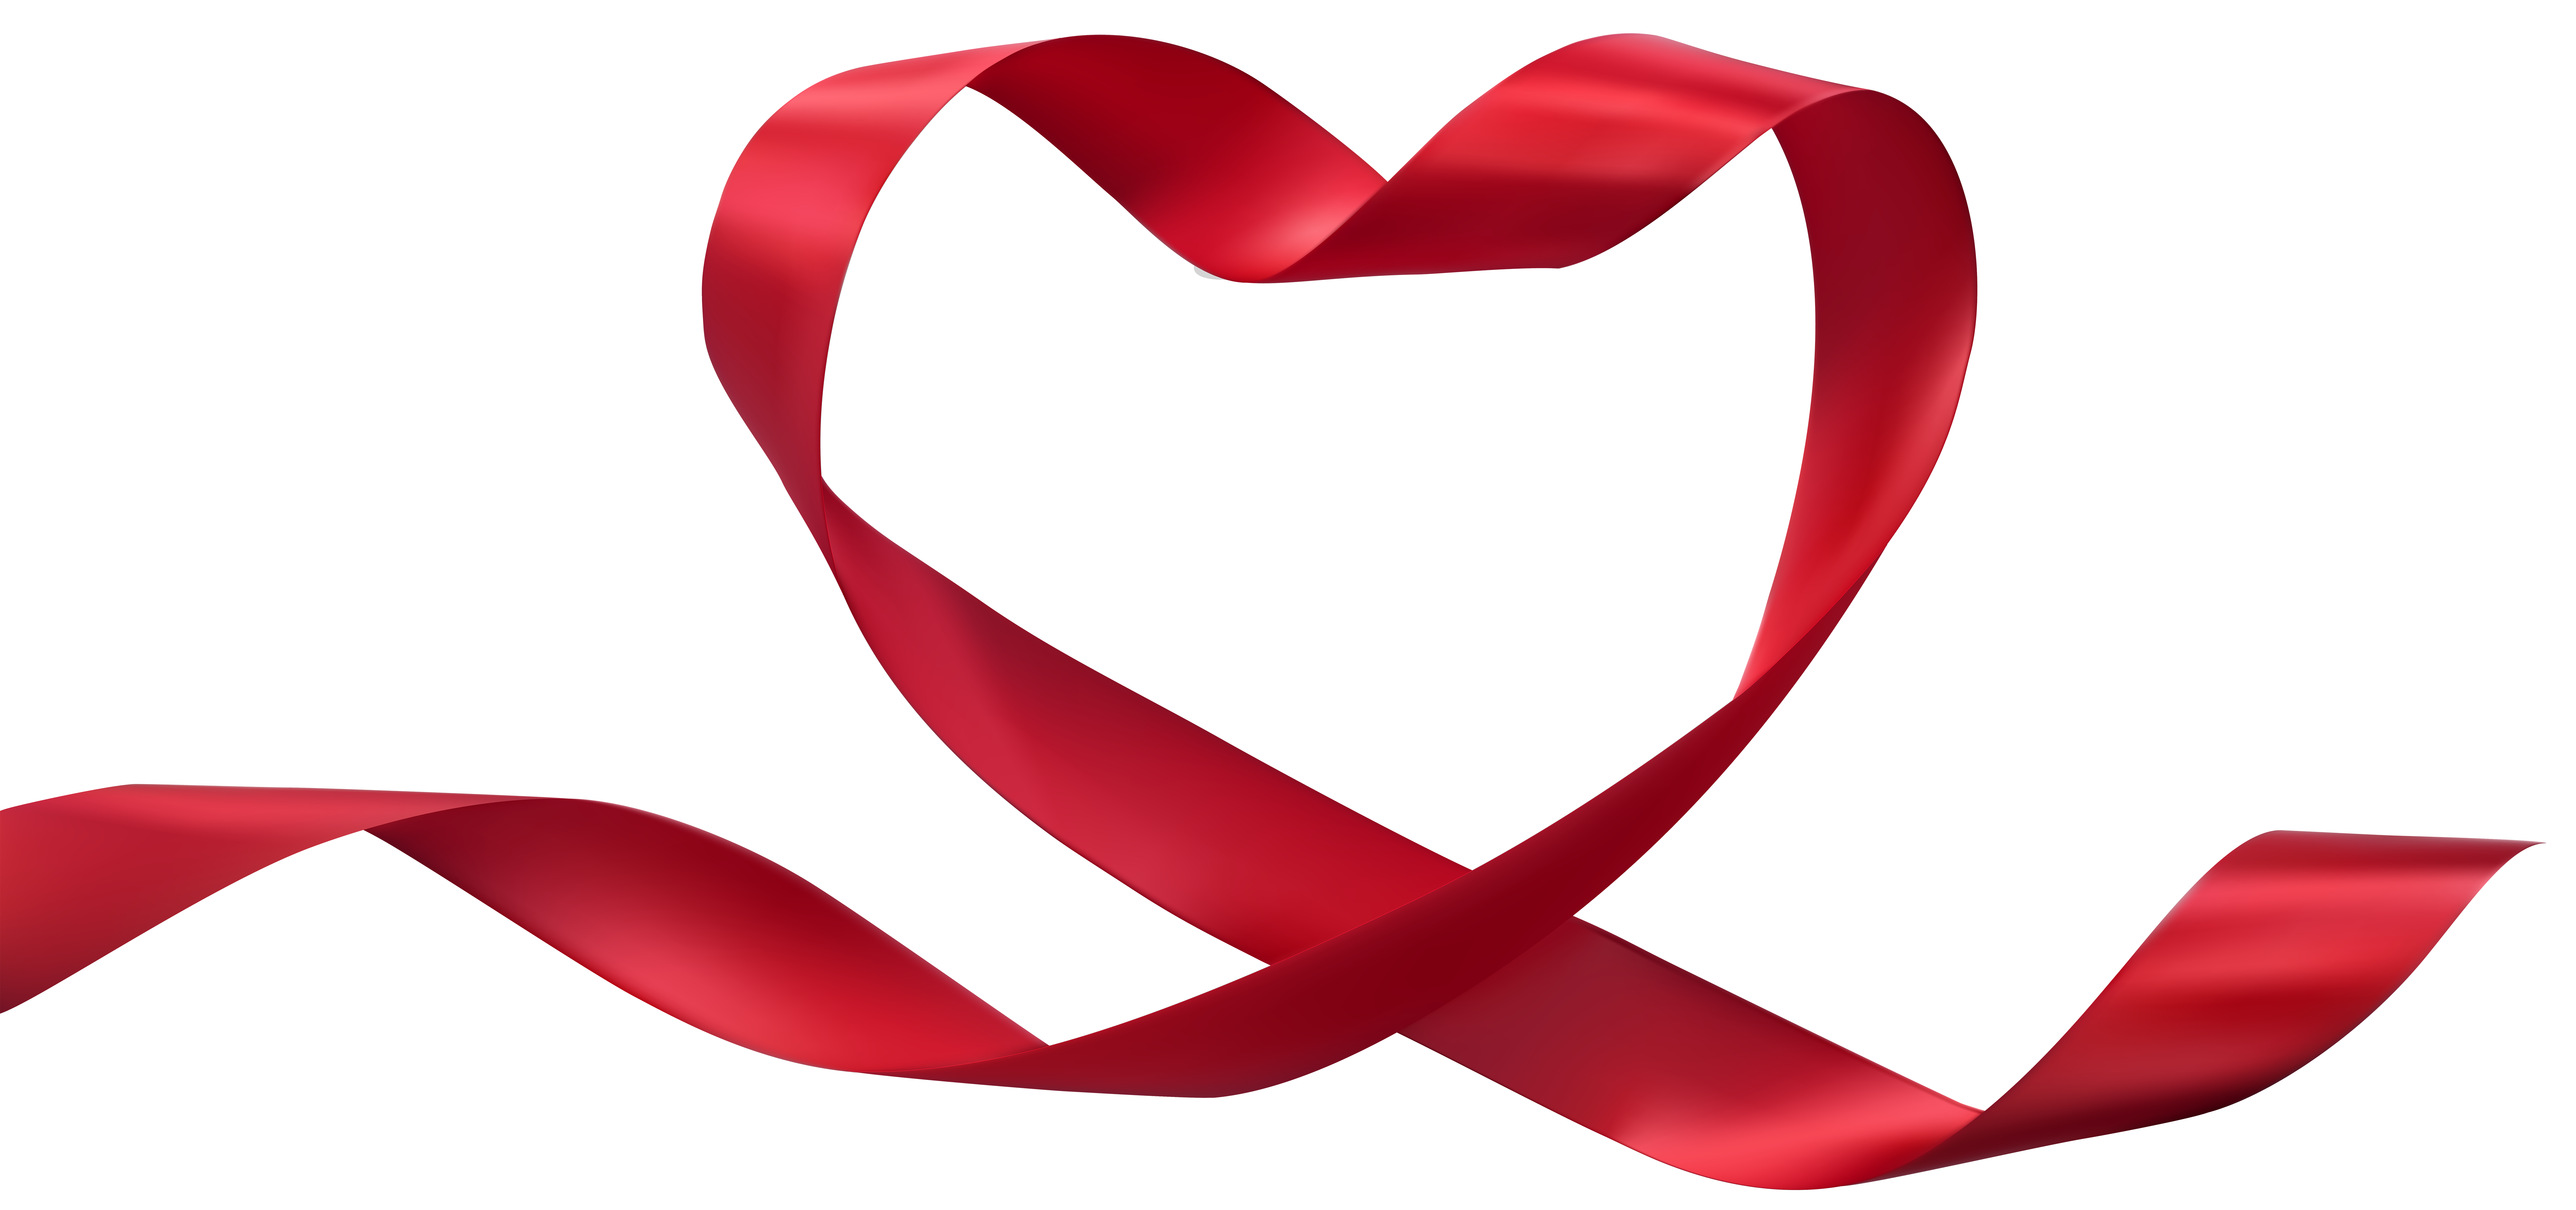 Heart Ribbon clipart. Free download transparent .PNG